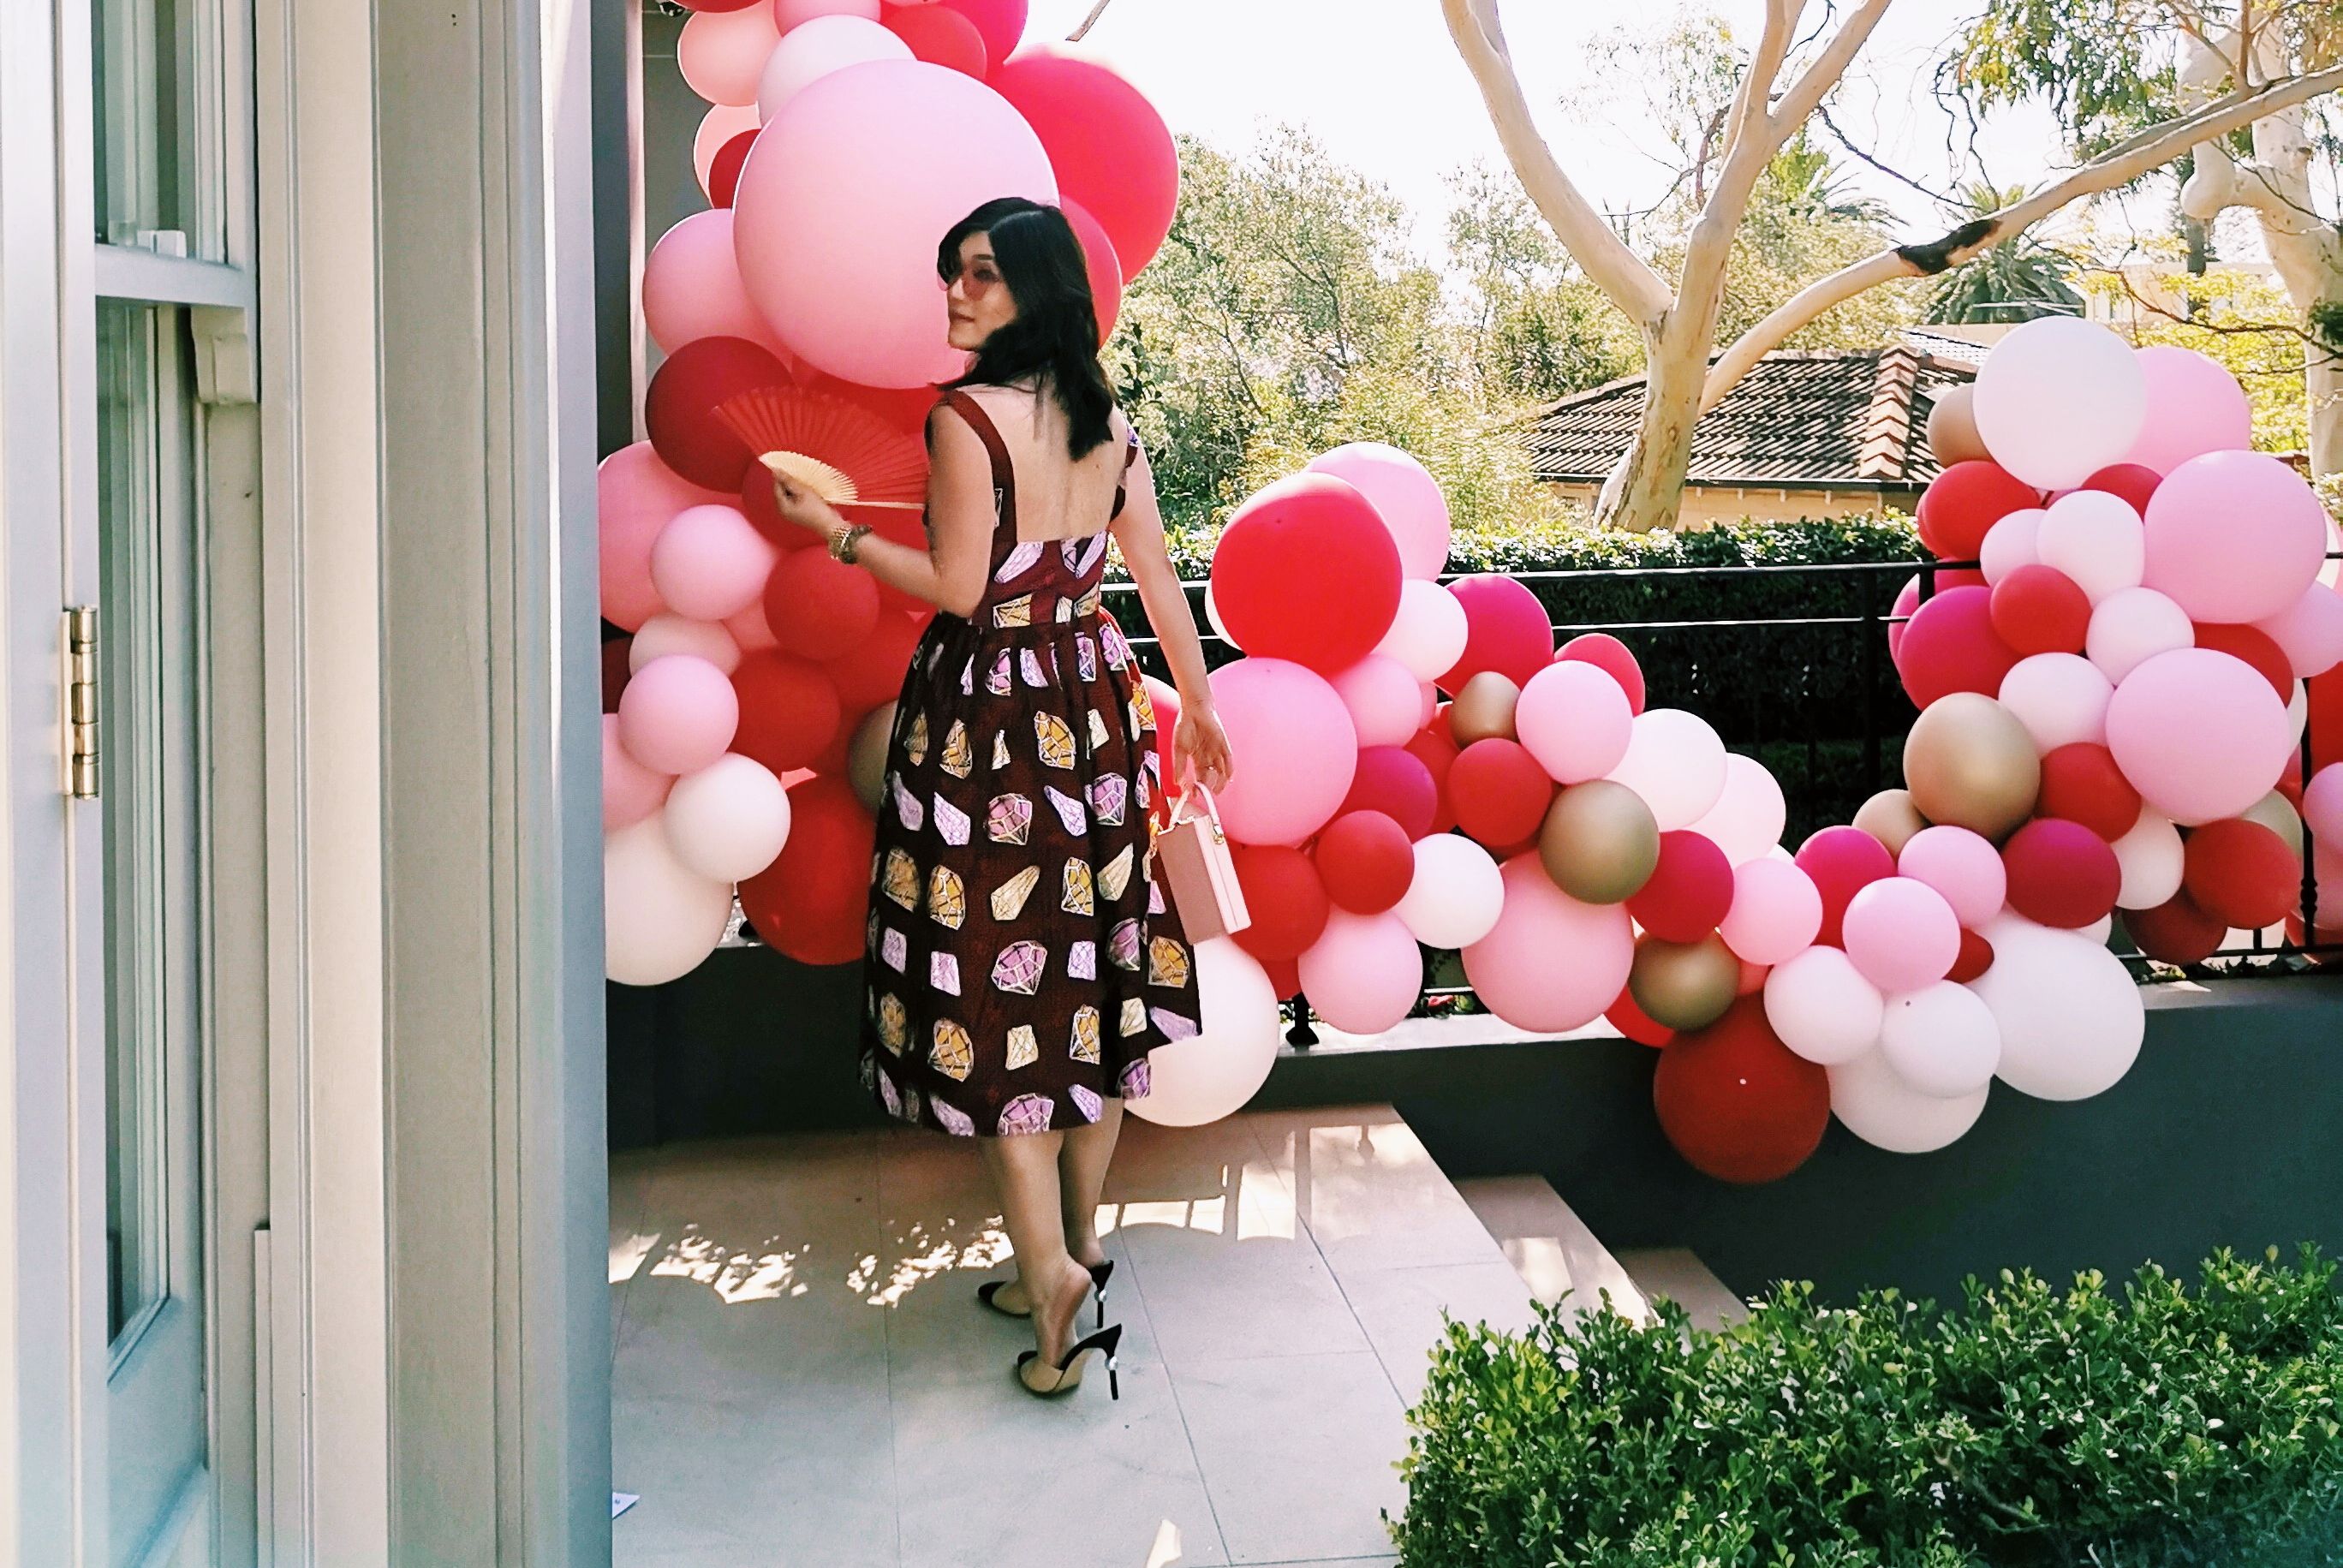 What to wear: Fashionistas give us their style tips for Valentine’s Day